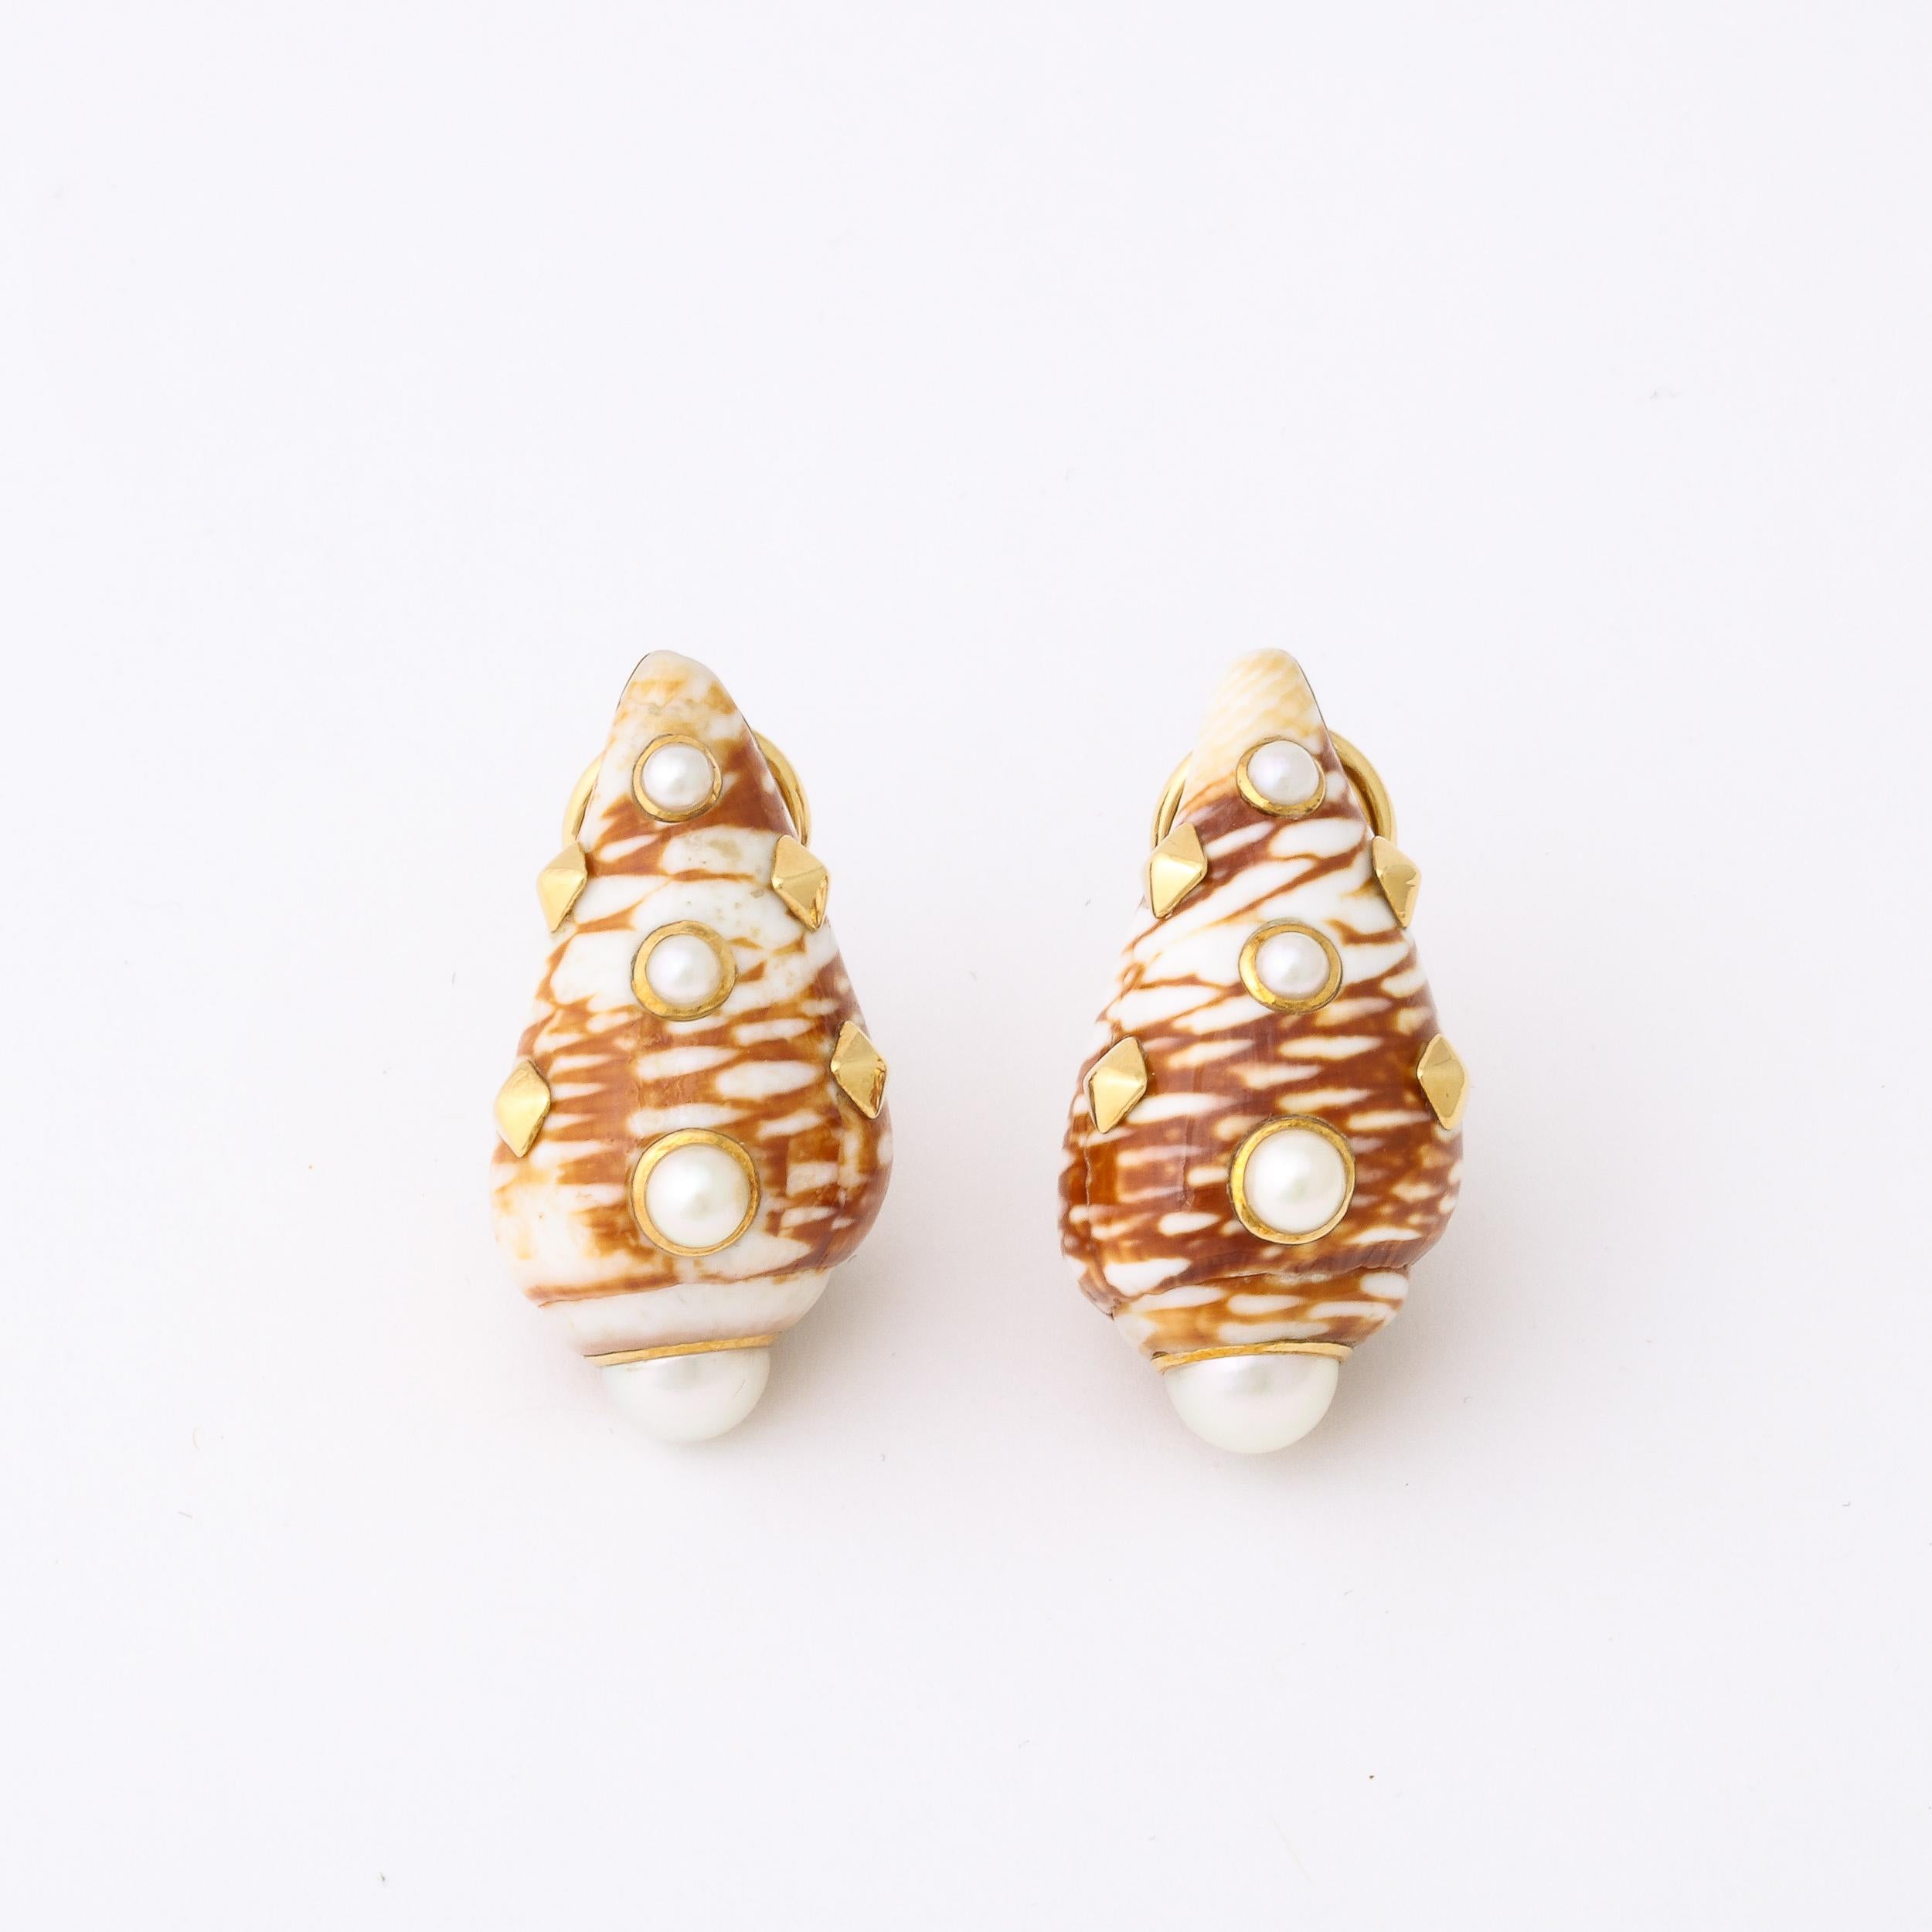 Uncut Red & Beige Shell Earrings Set in 18k Gold With Inlaid Pearls by Trianon For Sale